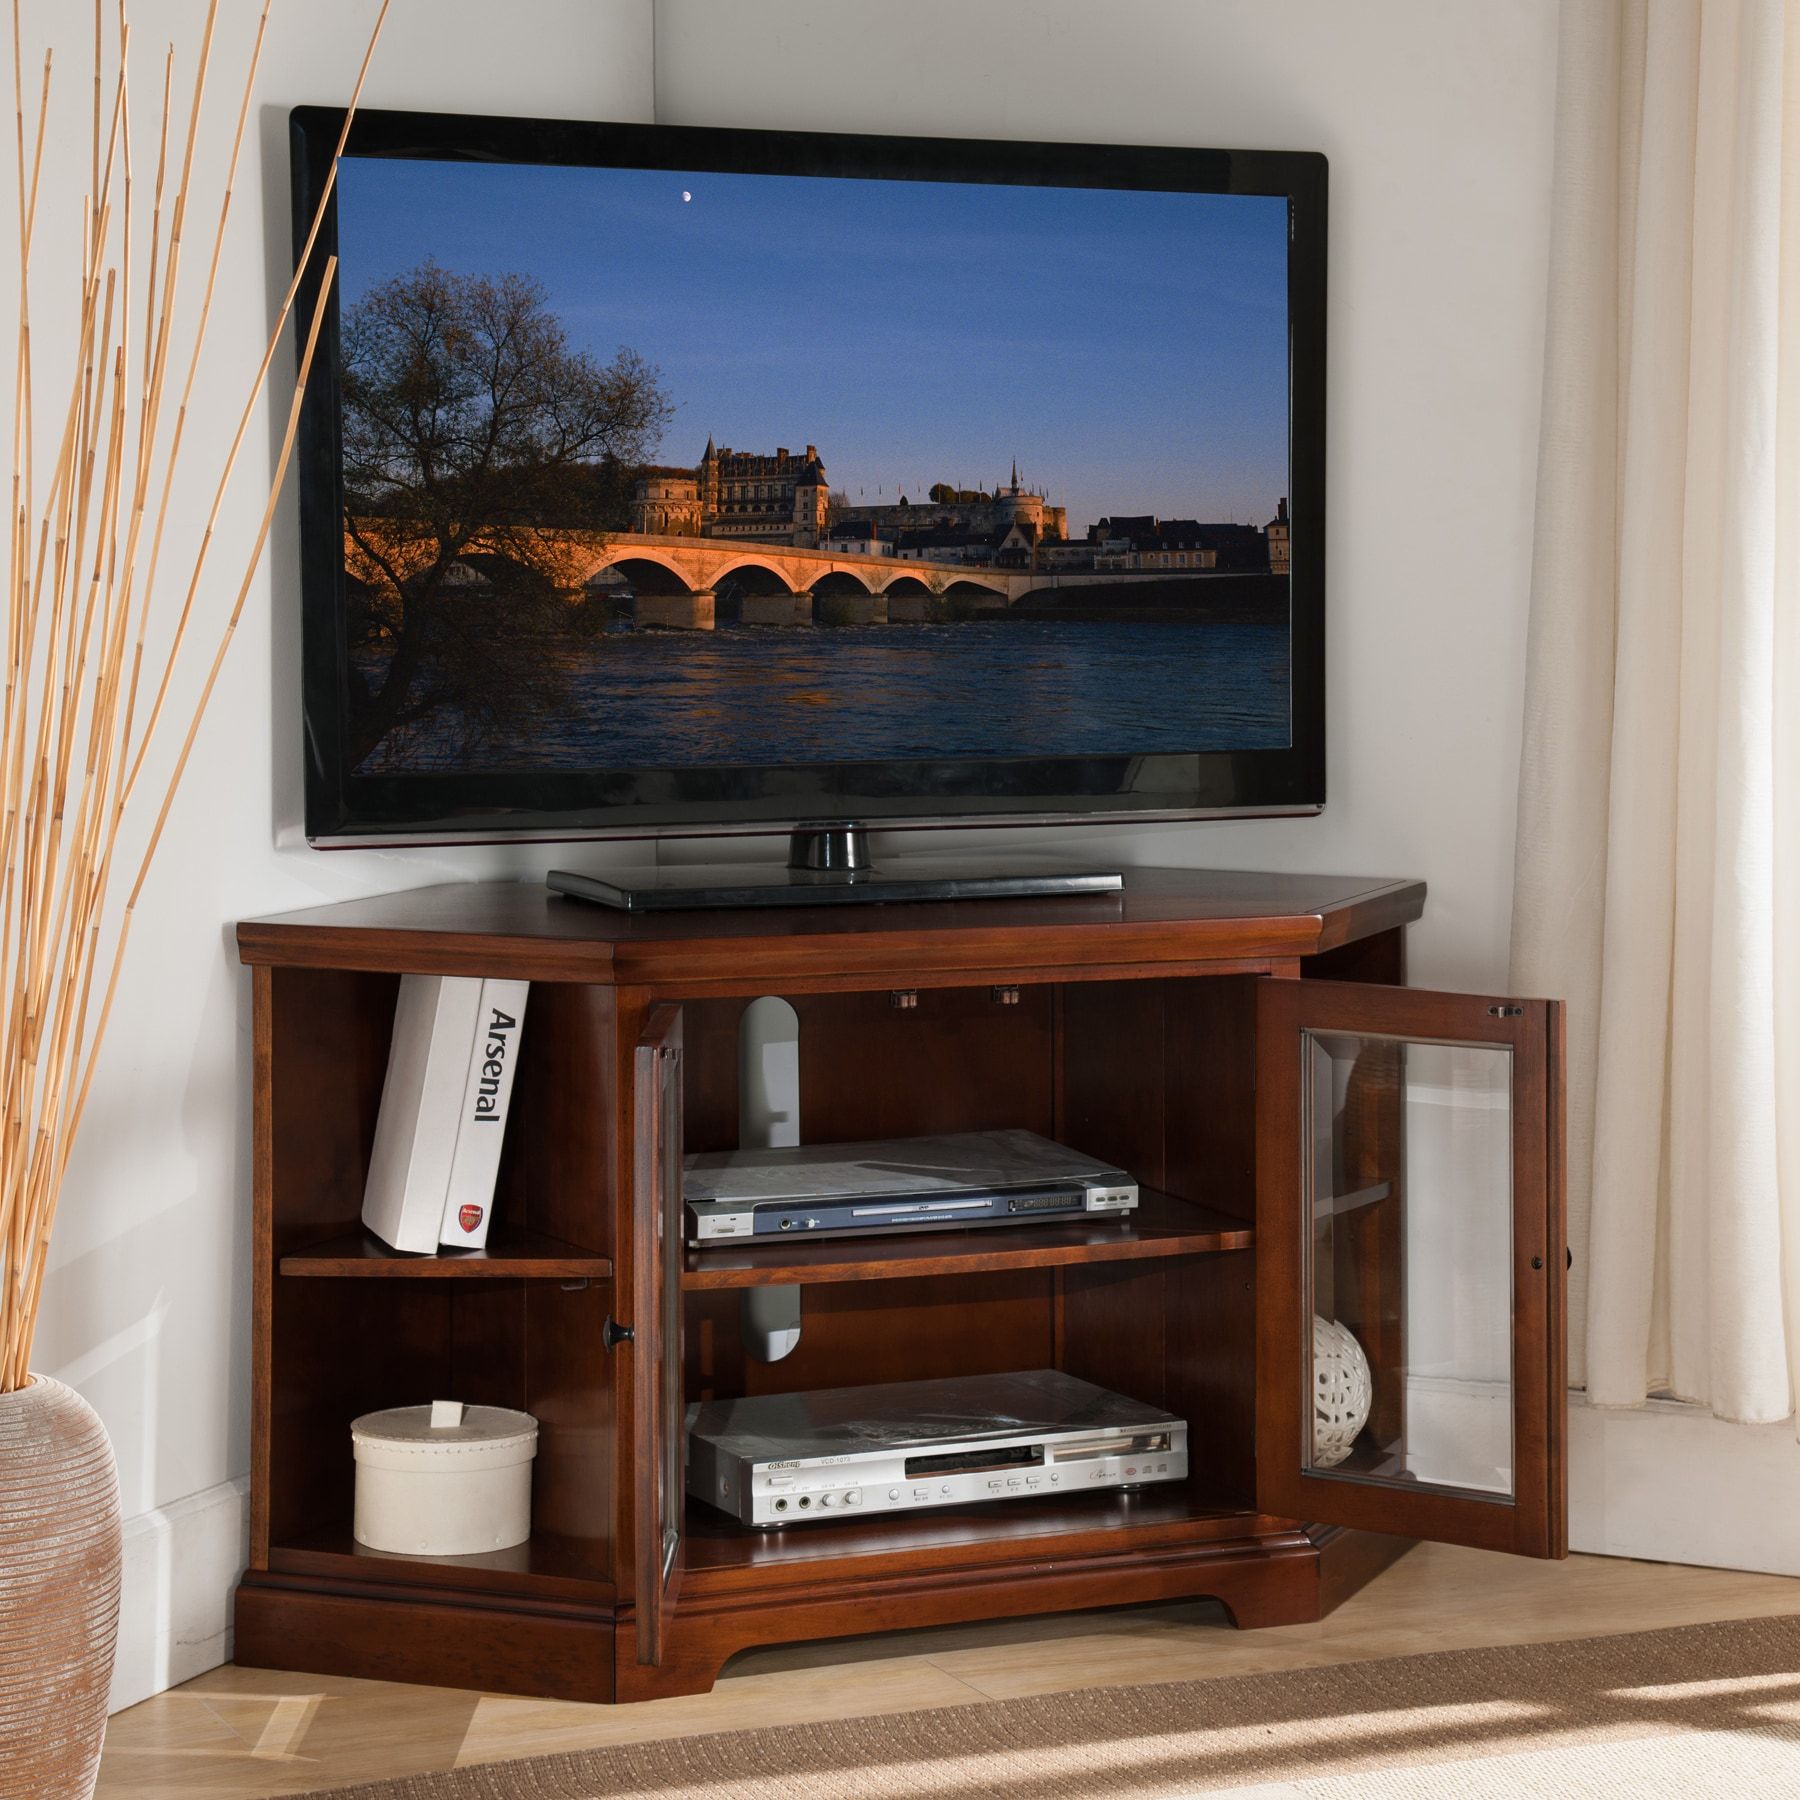 Shop Westwood Cherry 46 Inch Corner Tv Stand With Regarding Wooden Corner Tv Cabinets (View 5 of 15)